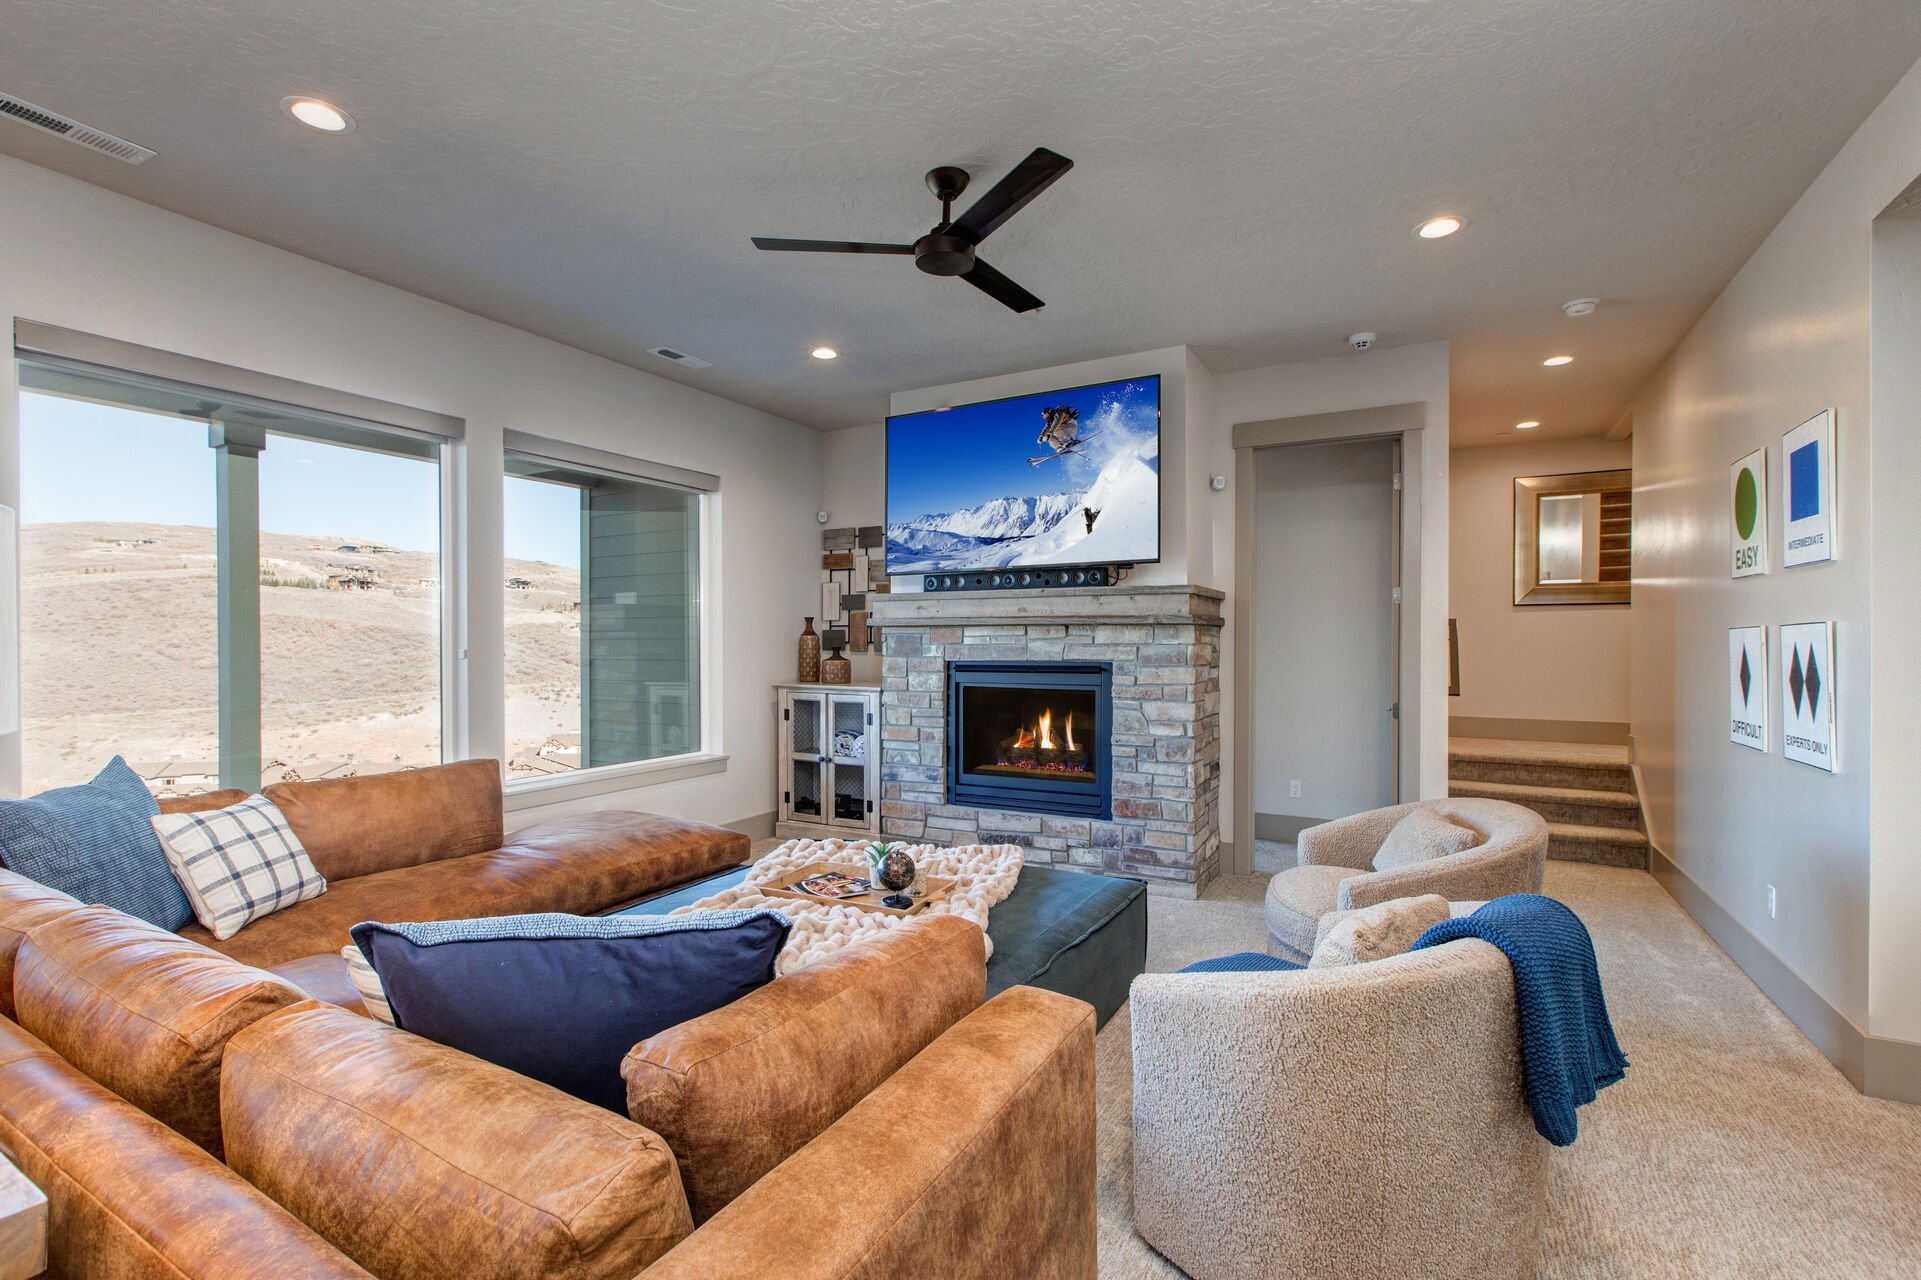 Lower Level Living and Game Room with over-sized leather sectional, plush arm chairs & ottoman, gas fireplace, Samsung smart tv, half bathroom, foosball table, air hockey table, and private patio hot tub access